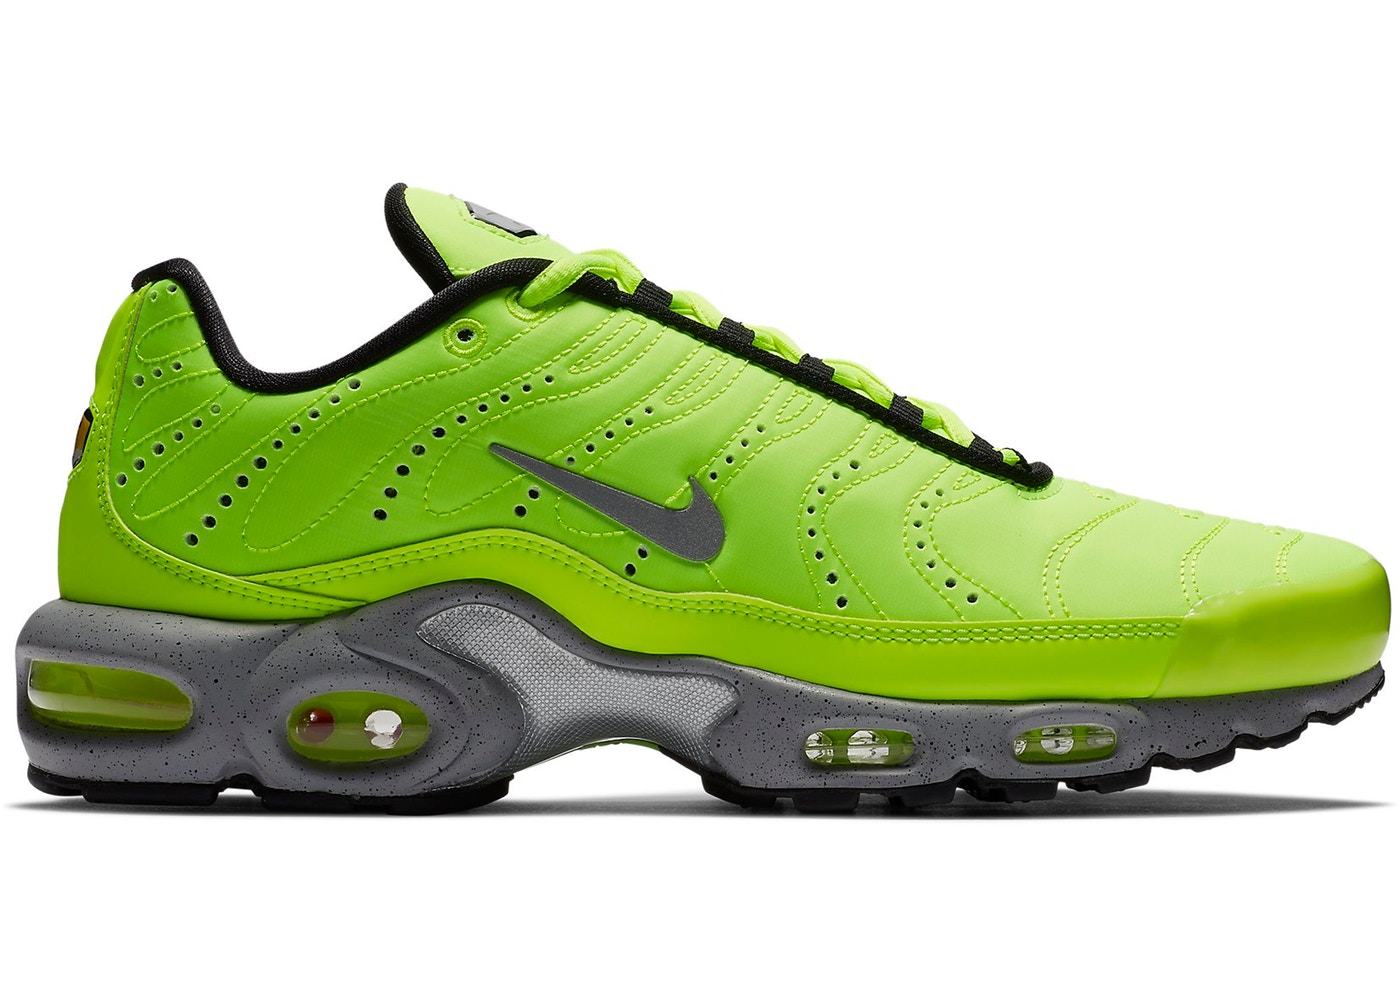 Take - nike volt air max - 79% off for 